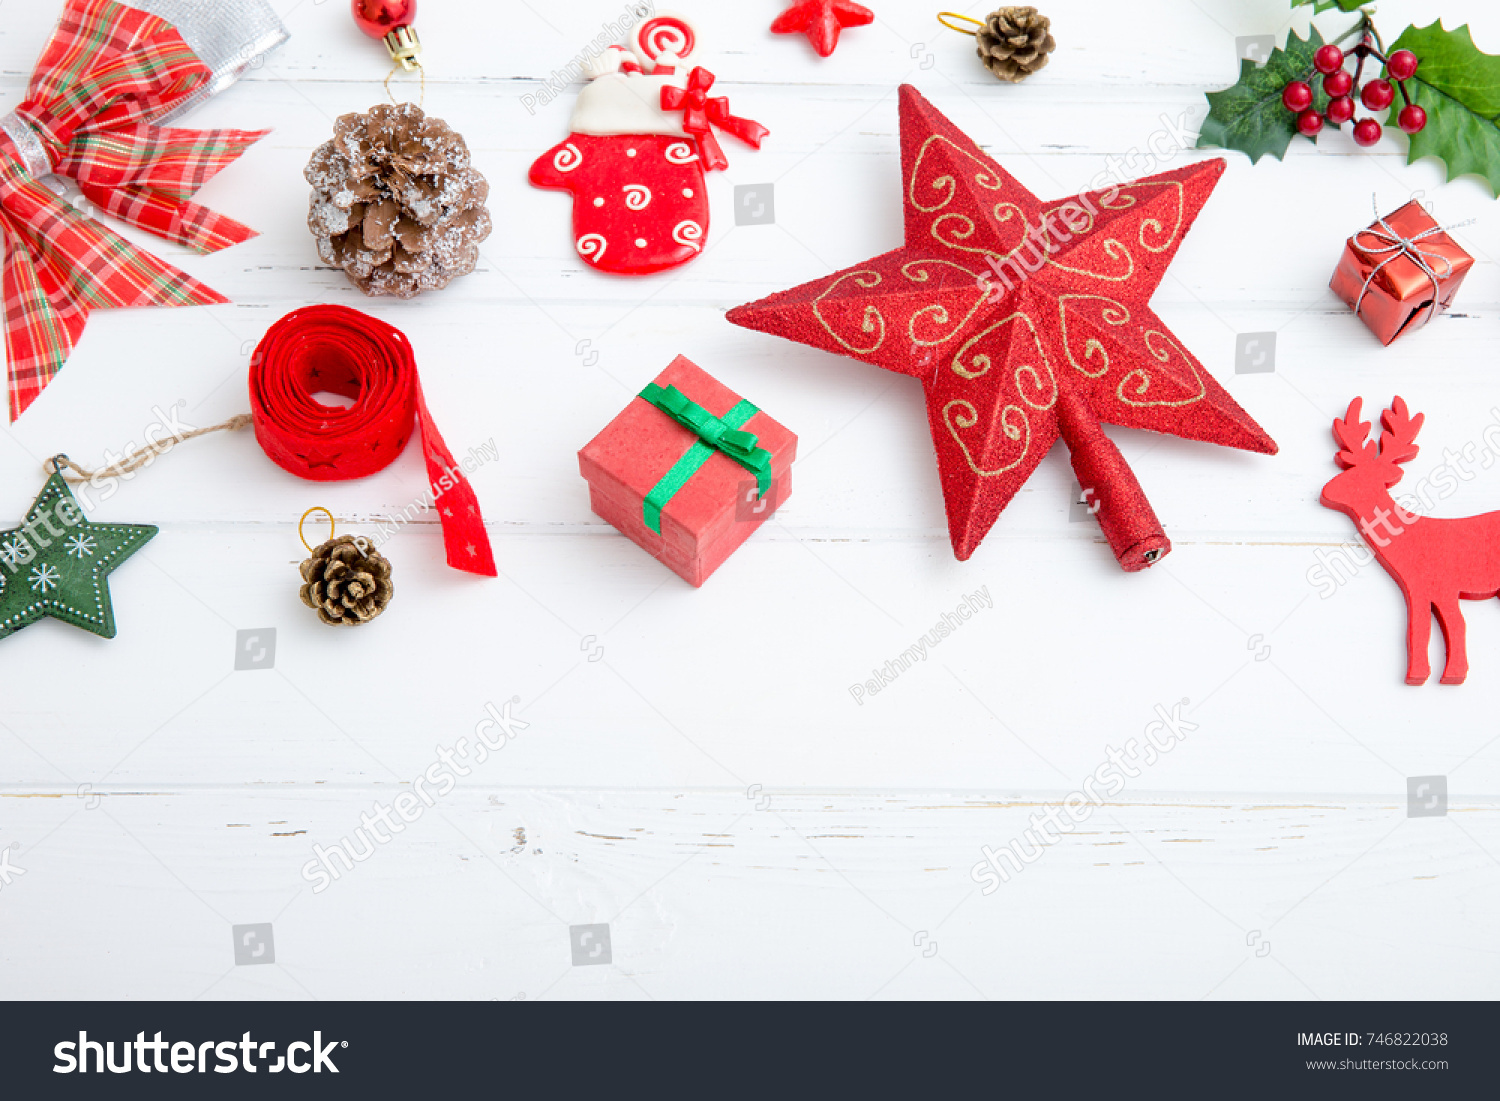 Christmas background with decorations and gift boxes on wooden board #746822038